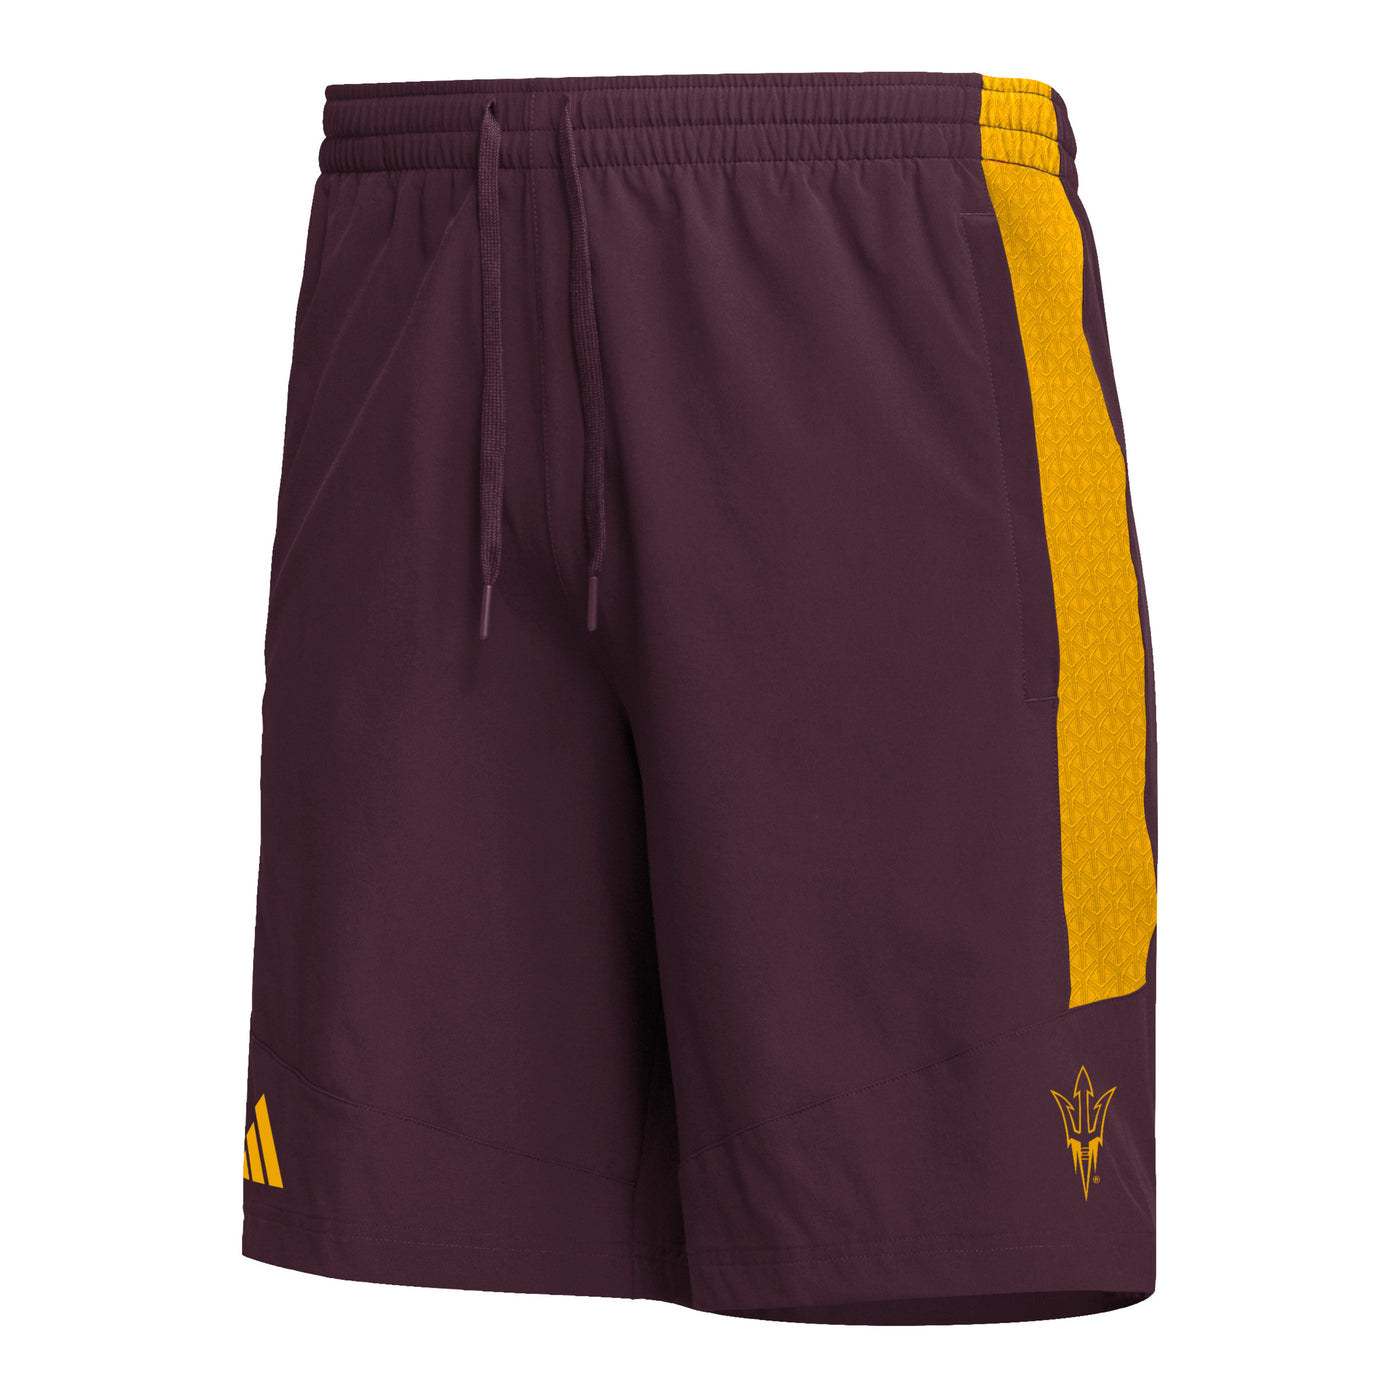 ASU maroon wind-breaker shorts with gold stipe down the side and a gold pitchfork logo